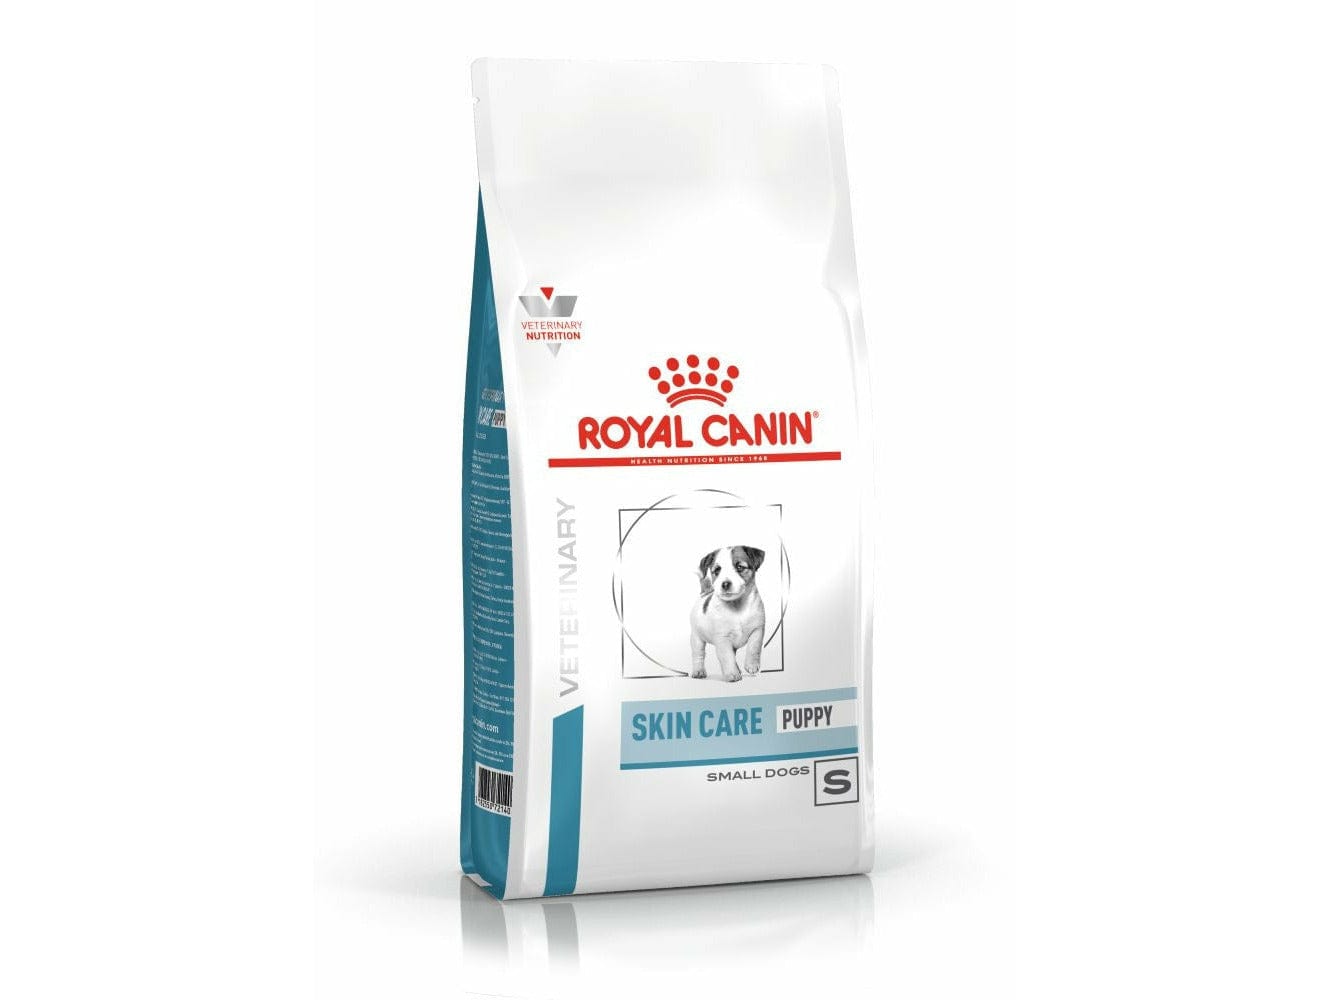 Vet Health Nutrition Canine Skin Care Small Dog Puppy 2 Kg